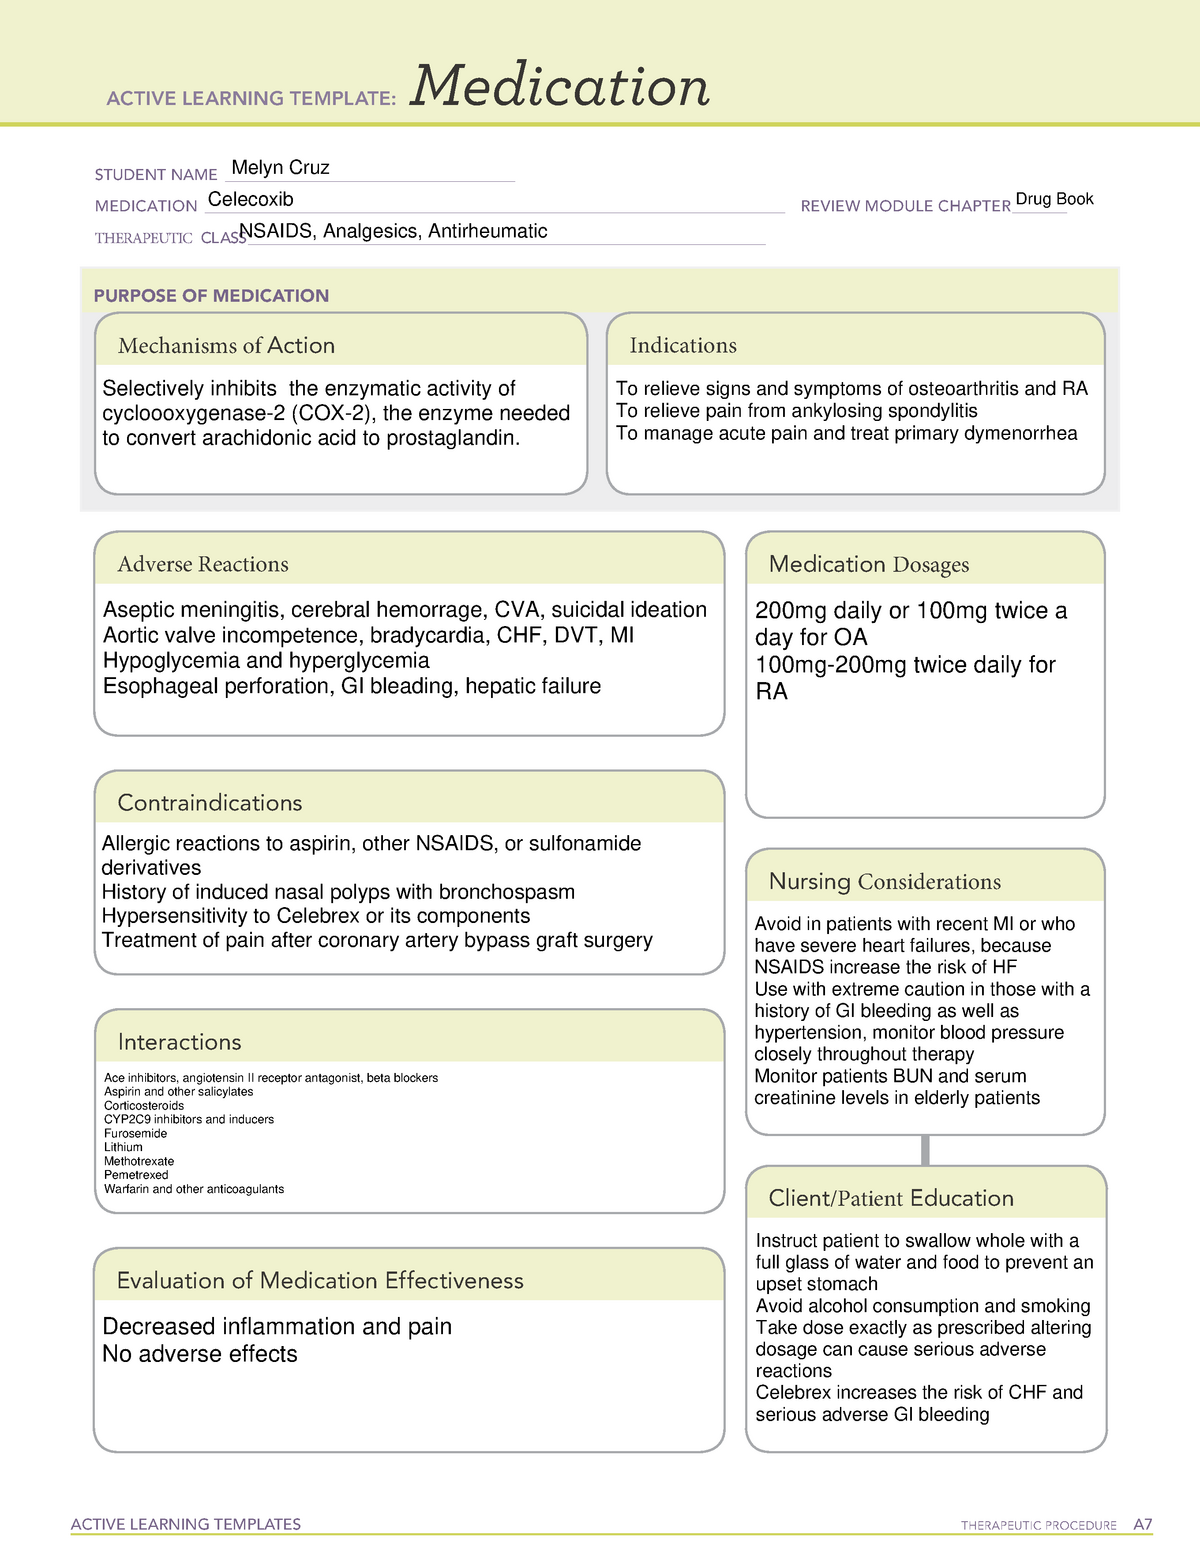 Celecoxib Template ACTIVE LEARNING TEMPLATES THERAPEUTIC PROCEDURE A